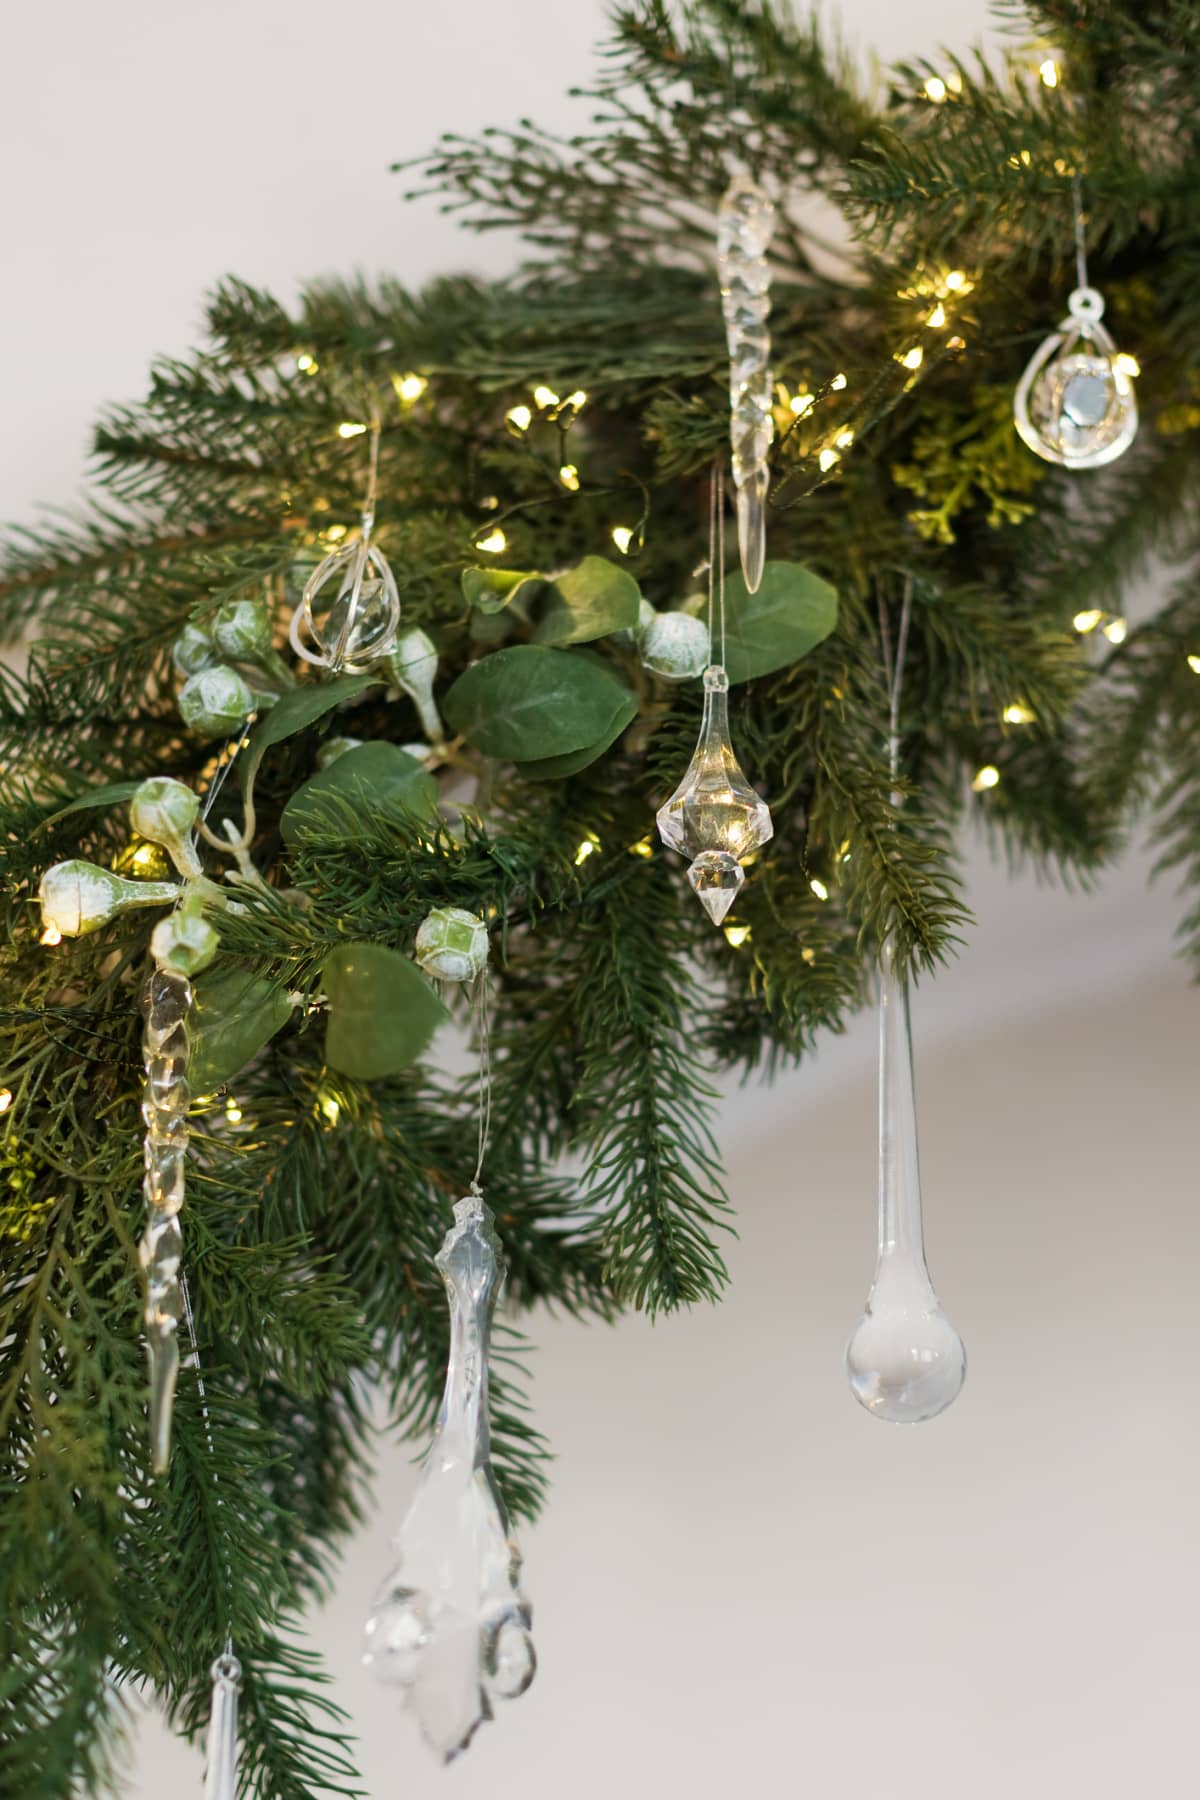 Christmas garland decorated with lights and ornaments